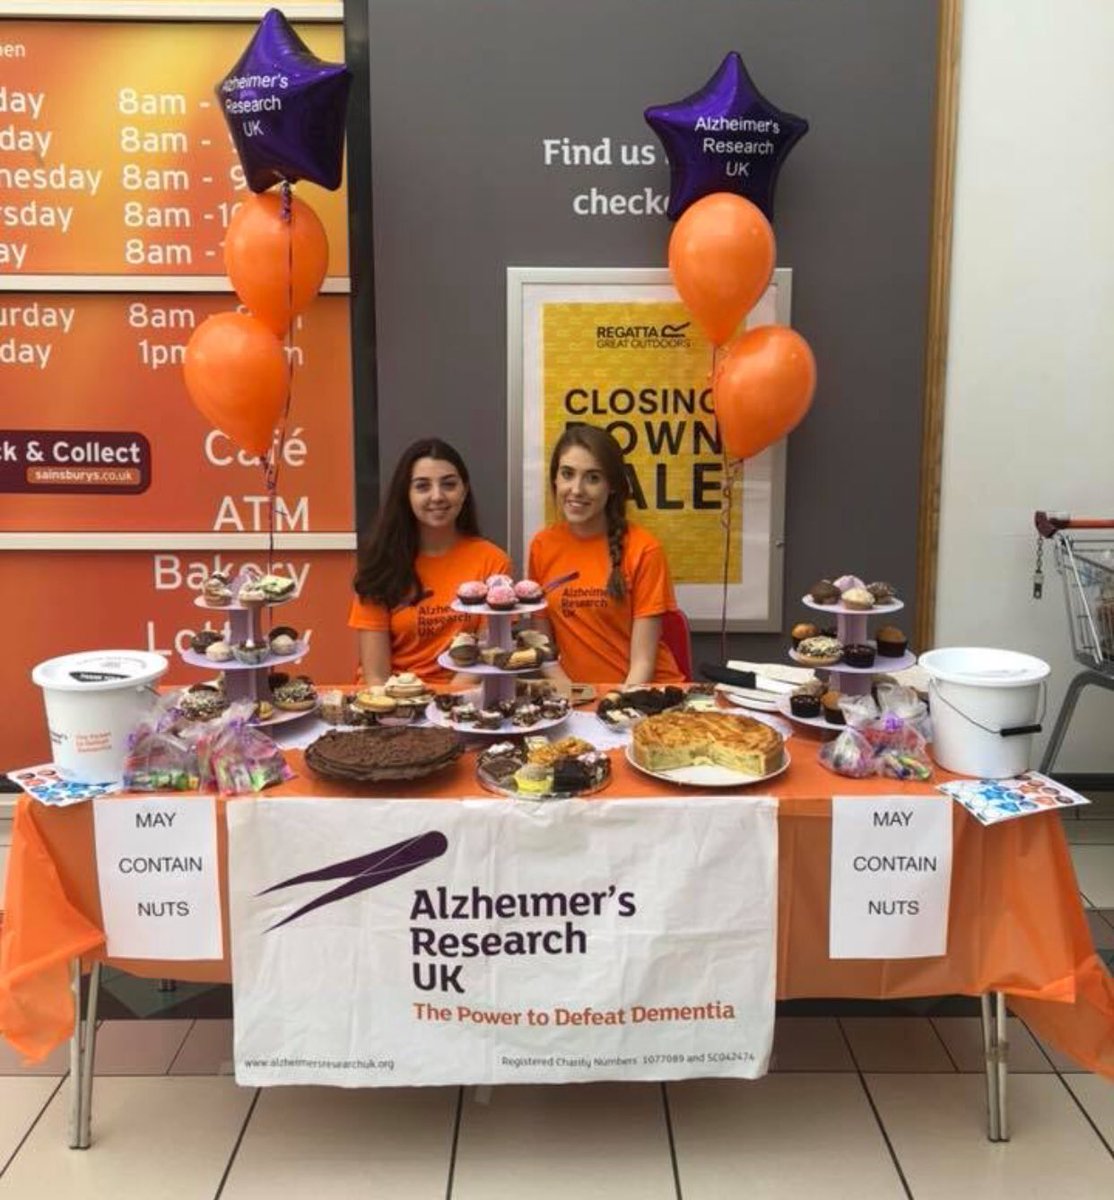 Another £650 raised for @ARUKnews by Team TPS Craigavon 💪🏼 a huge thank you to everyone who donated and provided buns for our Bake sale @RushmereSC #AlzheimersresearchUK
@TPSPeople 
@ThePerfumeShop